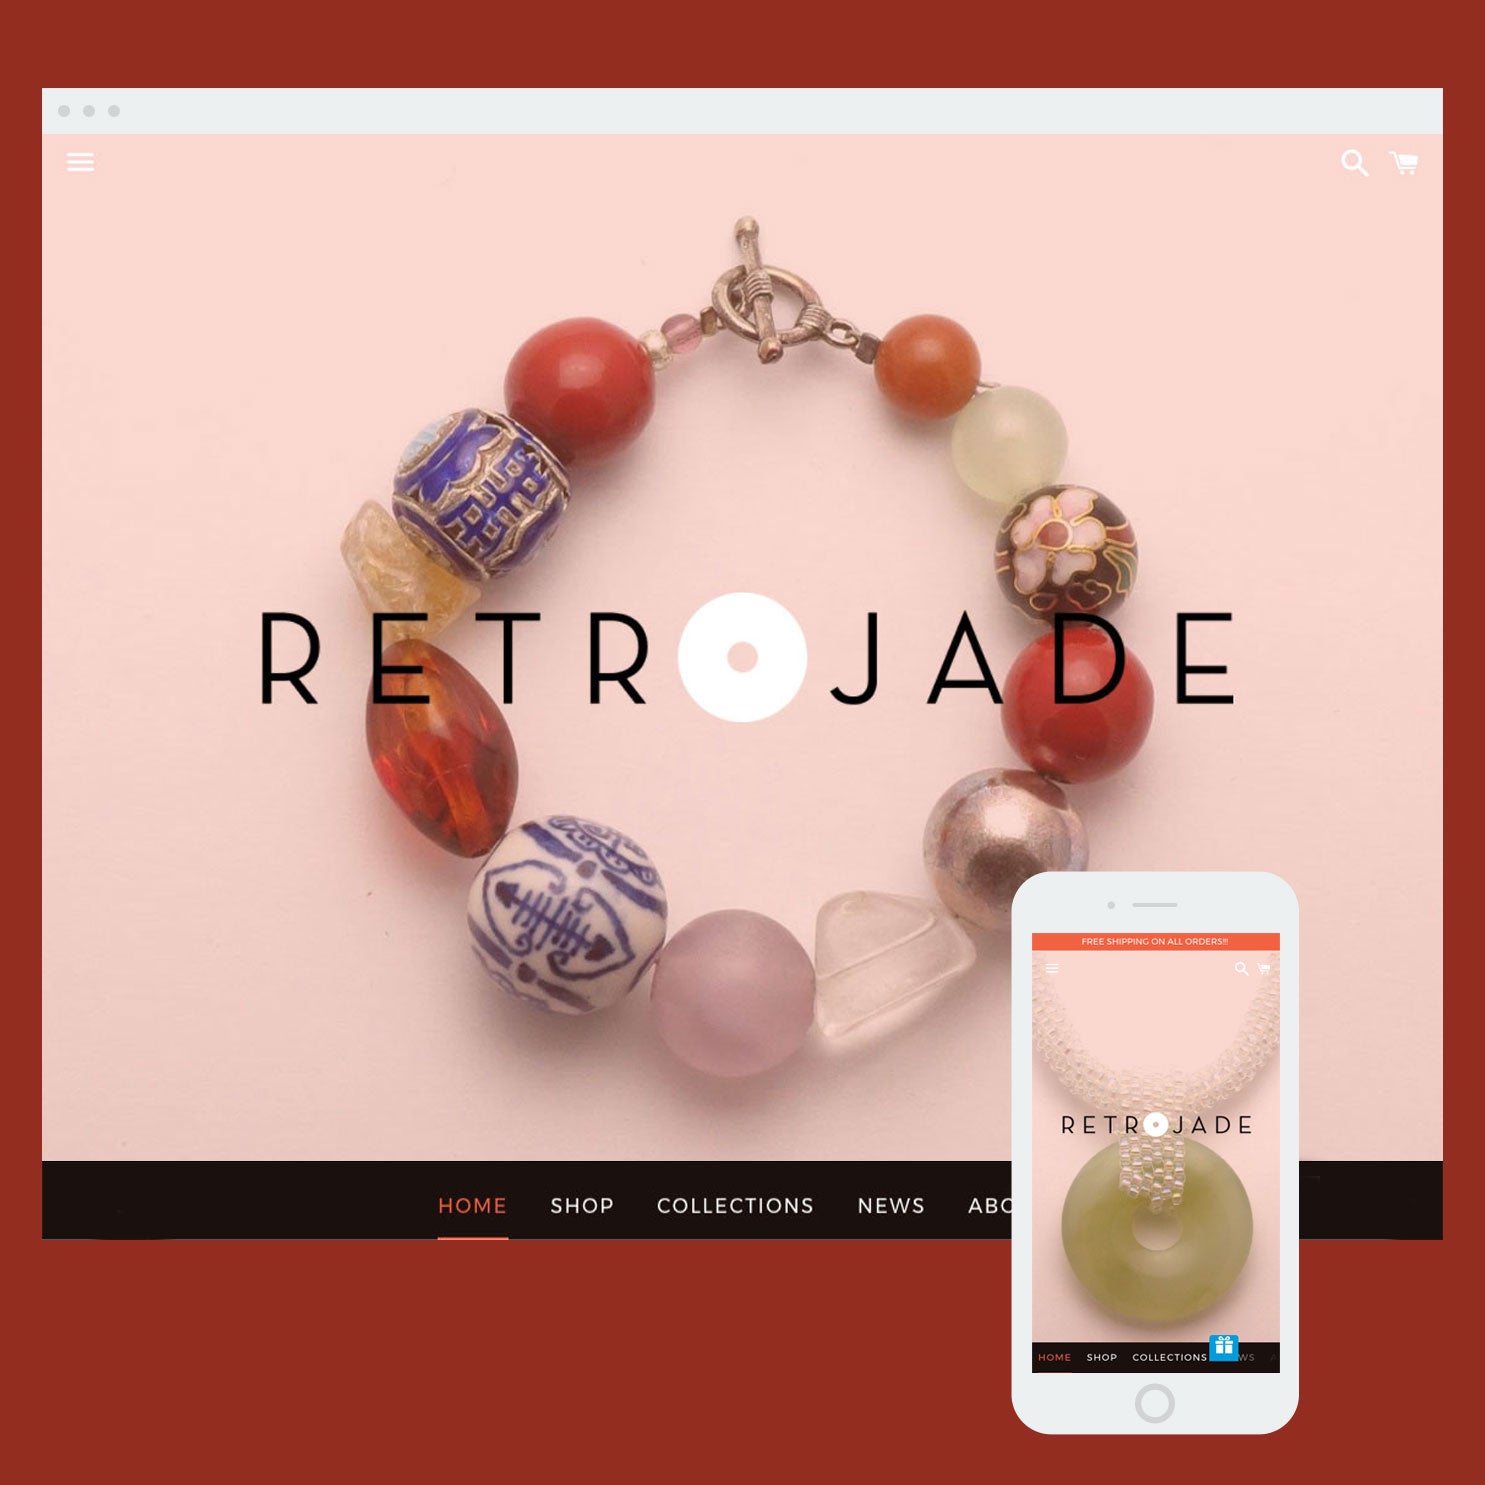 Retrojade: Shopify store by Cooee Commerce